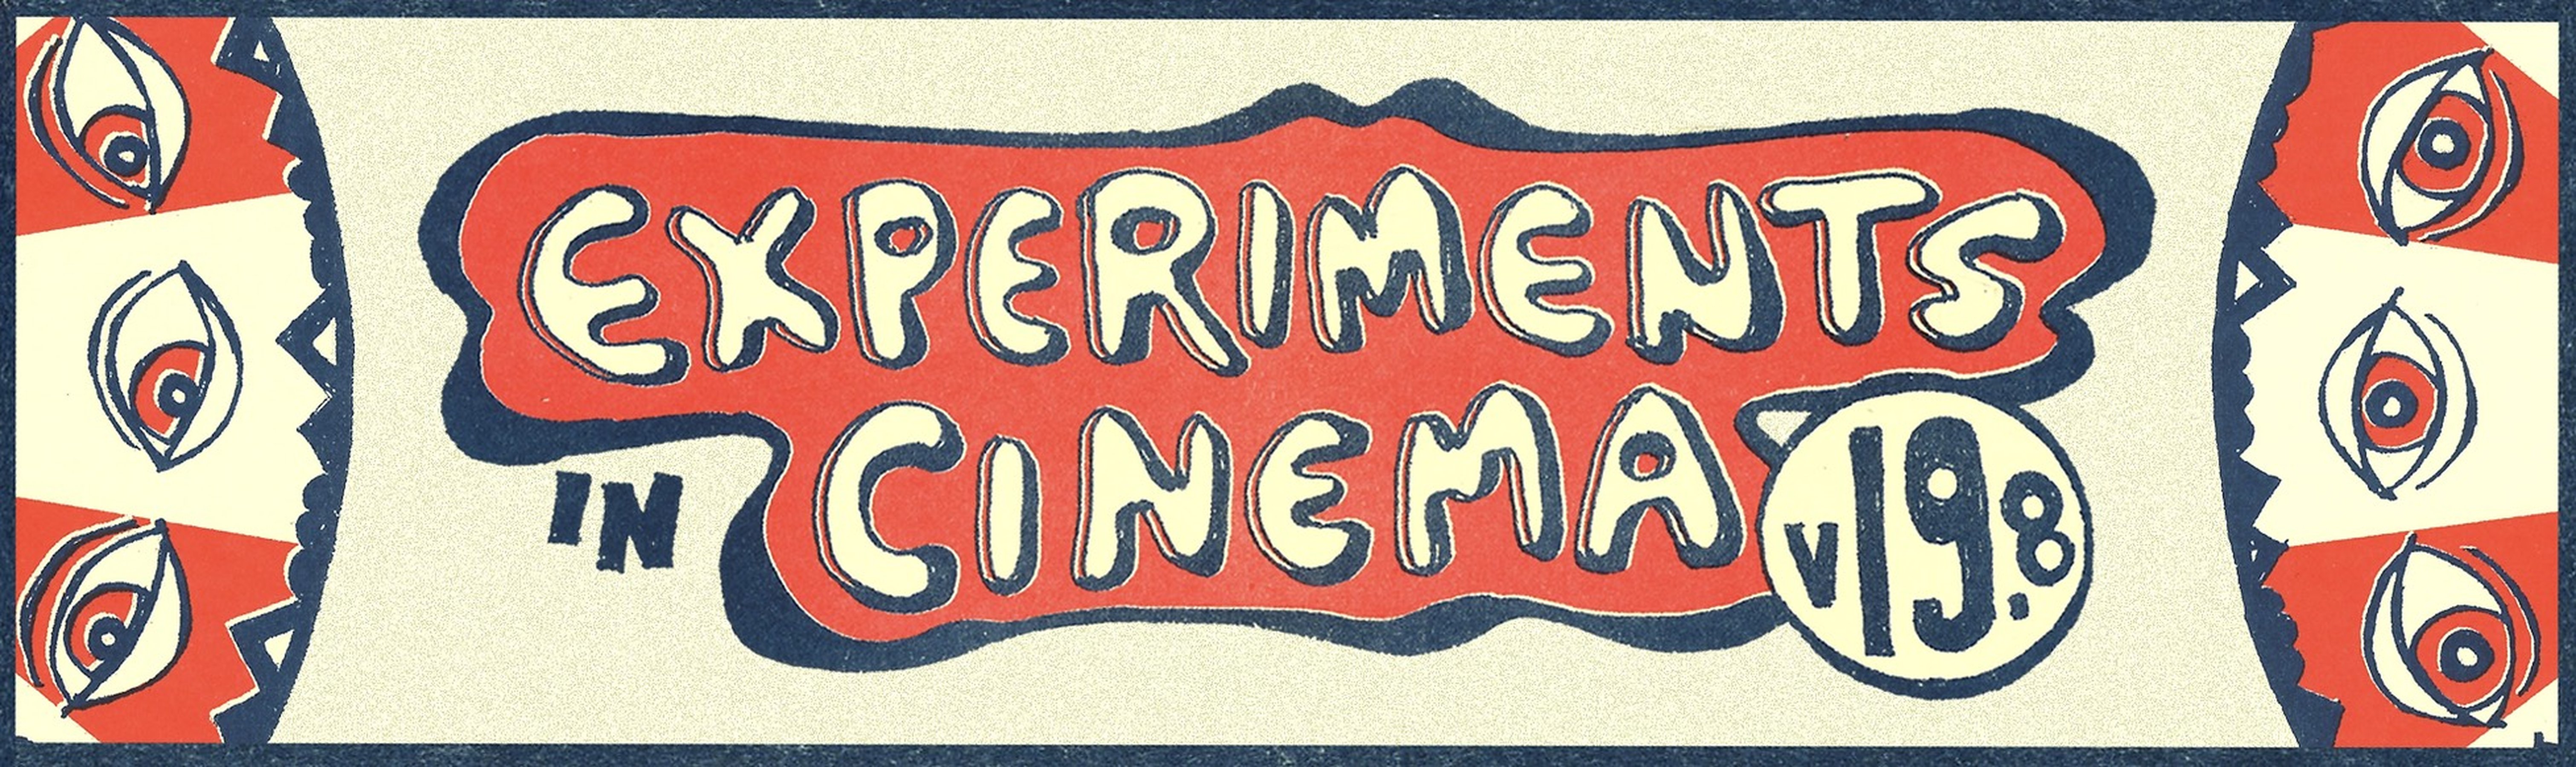 Experiments in Cinema festival